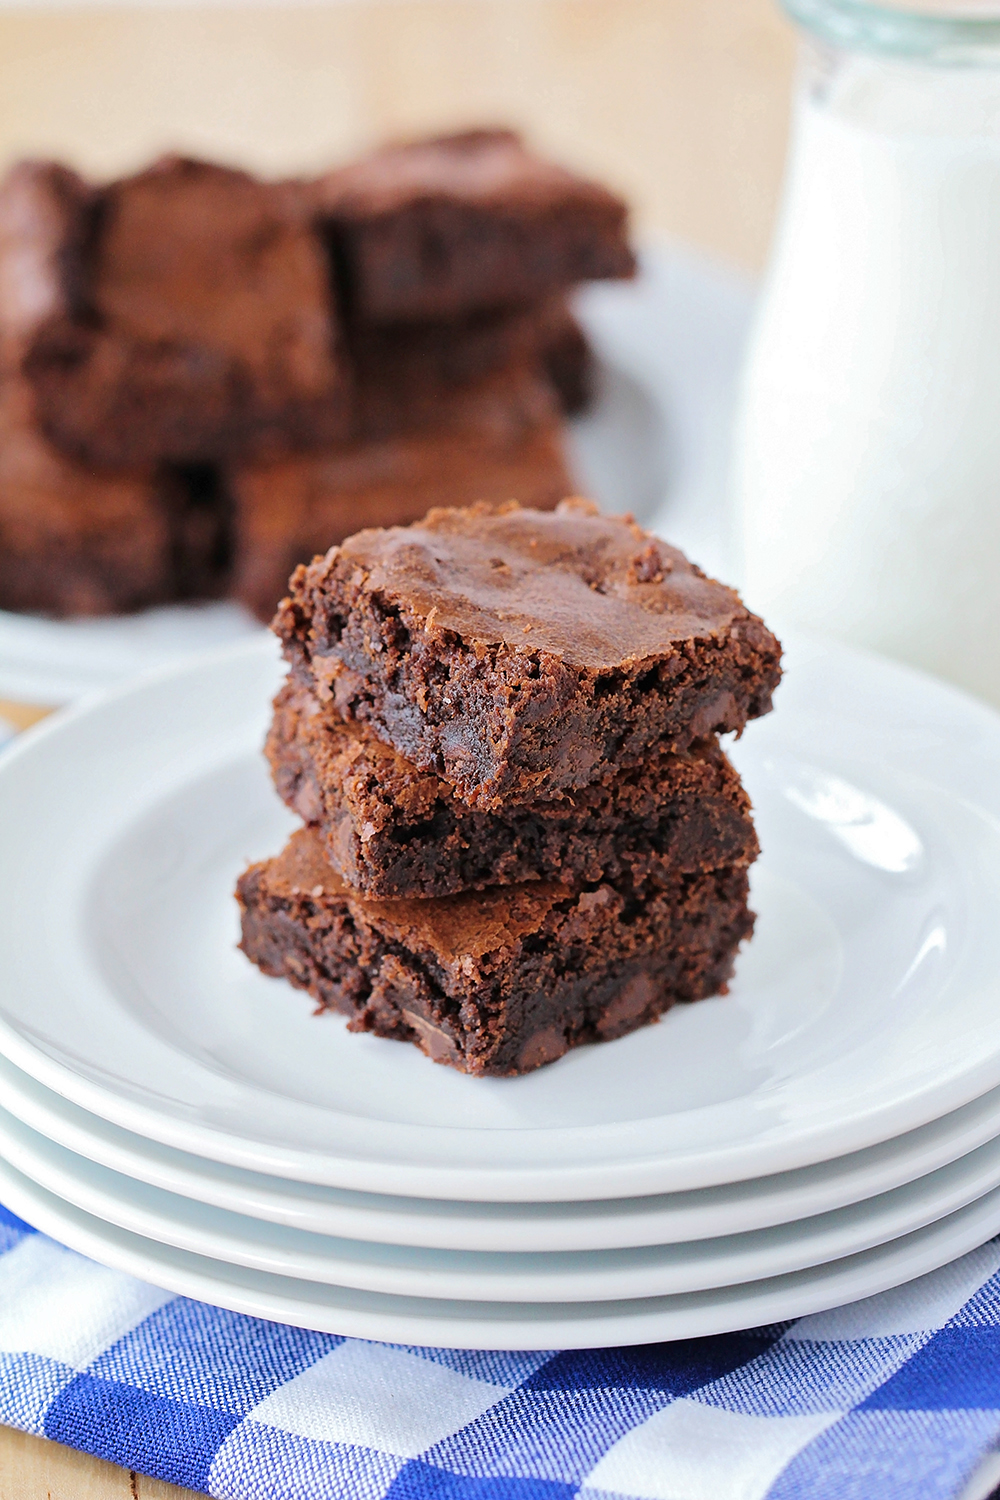 These chewy and fudgy brownies are so rich and decadent, and take just a few minutes to mix up. They're perfect for satisfying those chocolate cravings any time!